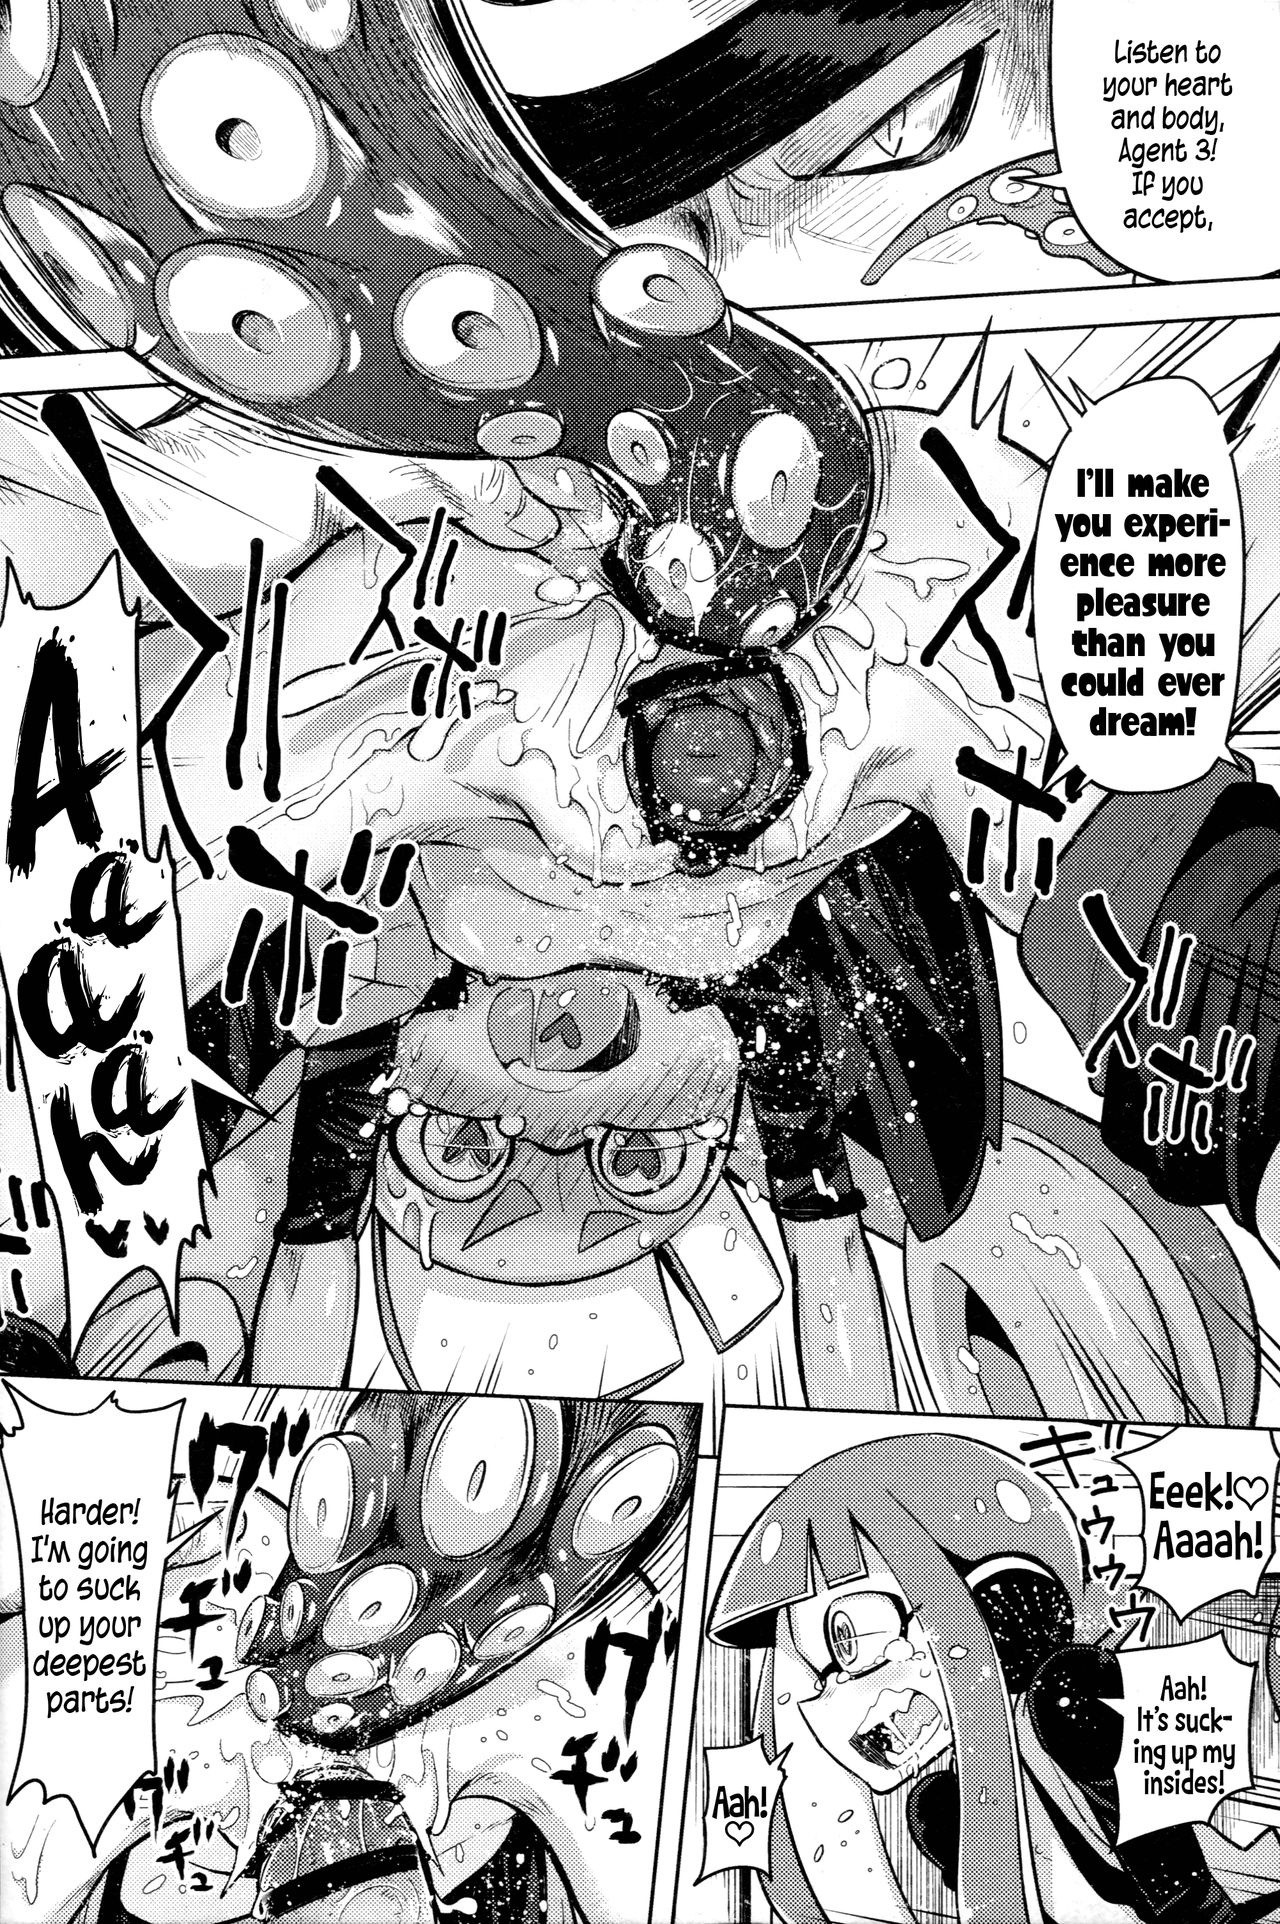 Hero by a Hair's Breadth hentai manga picture 18